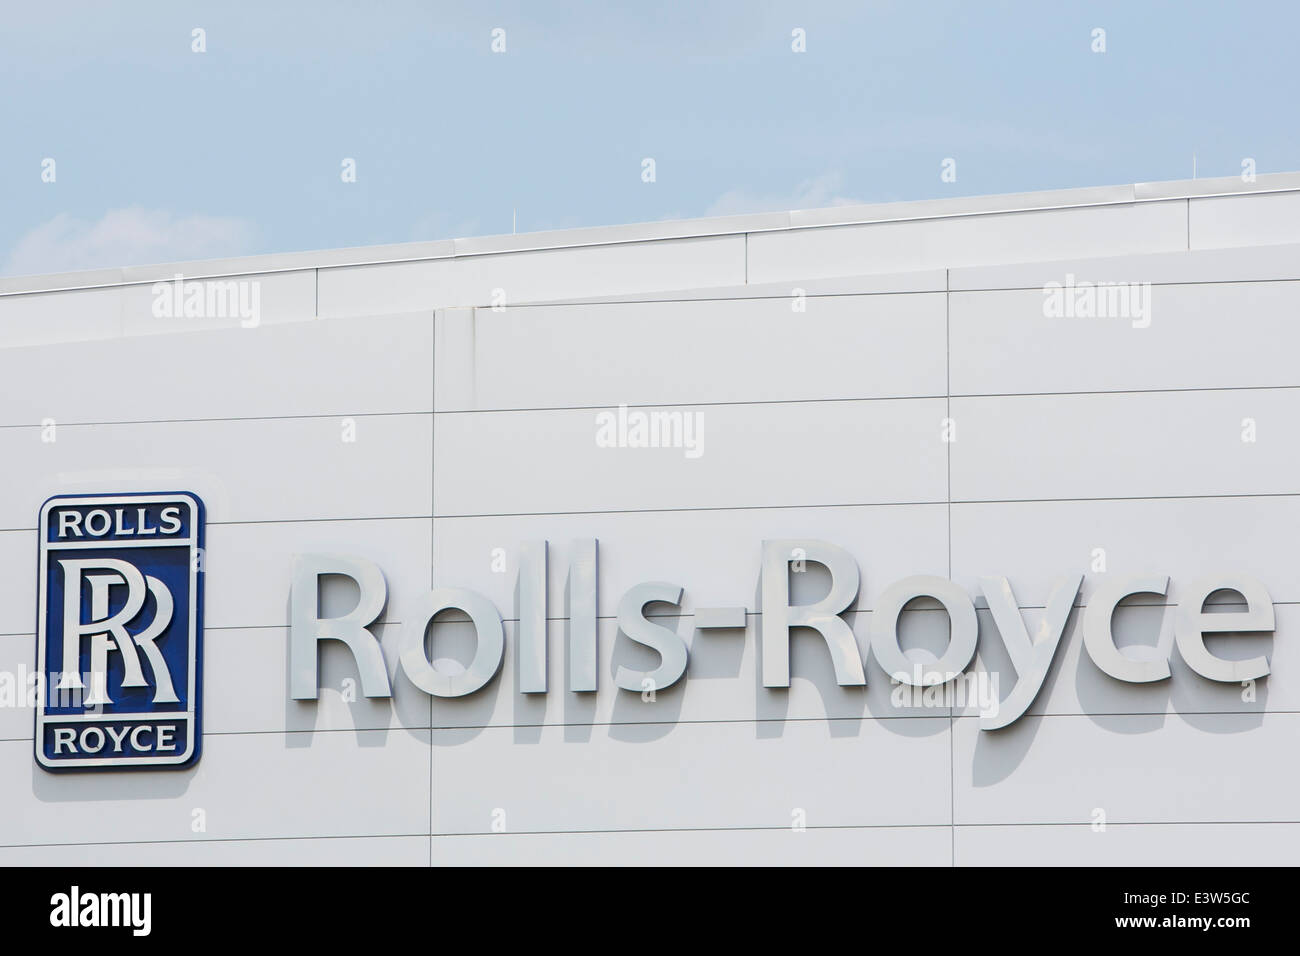 The Rolls-Royce Crosspointe manufacturing plant in Prince George, Virginia.  Stock Photo